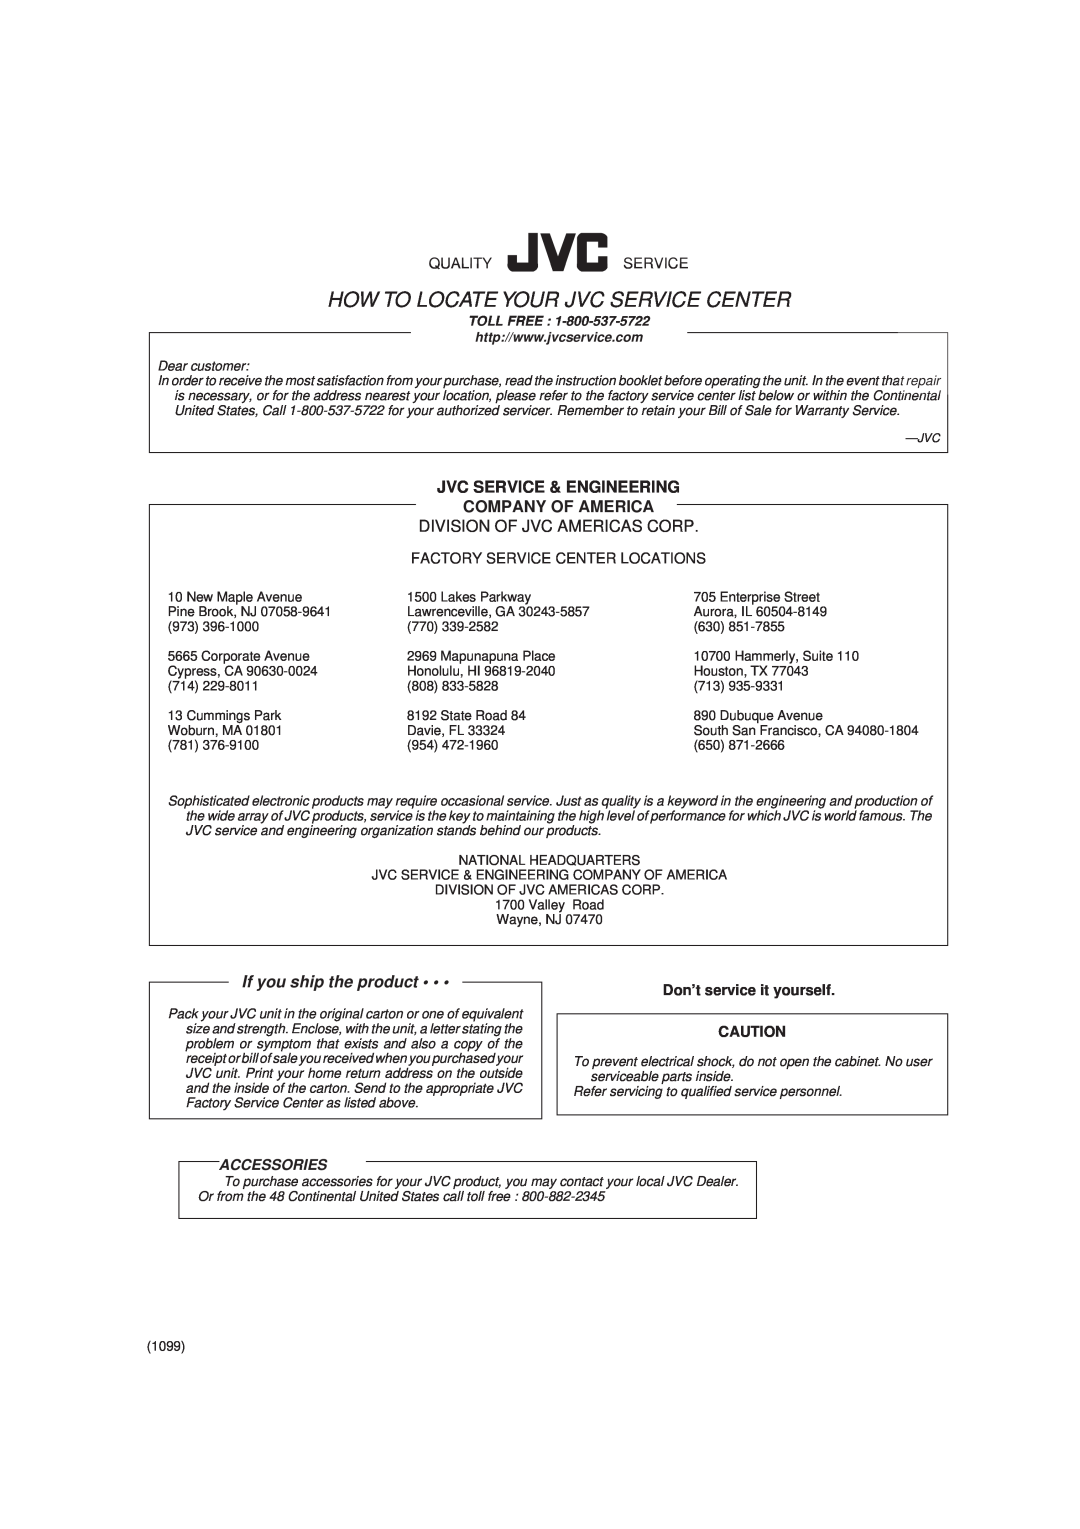 JVC SP-MXJ700 Jvc Service & Engineering Company Of America, Division Of Jvc Americas Corp, Qualityservice, Accessories 